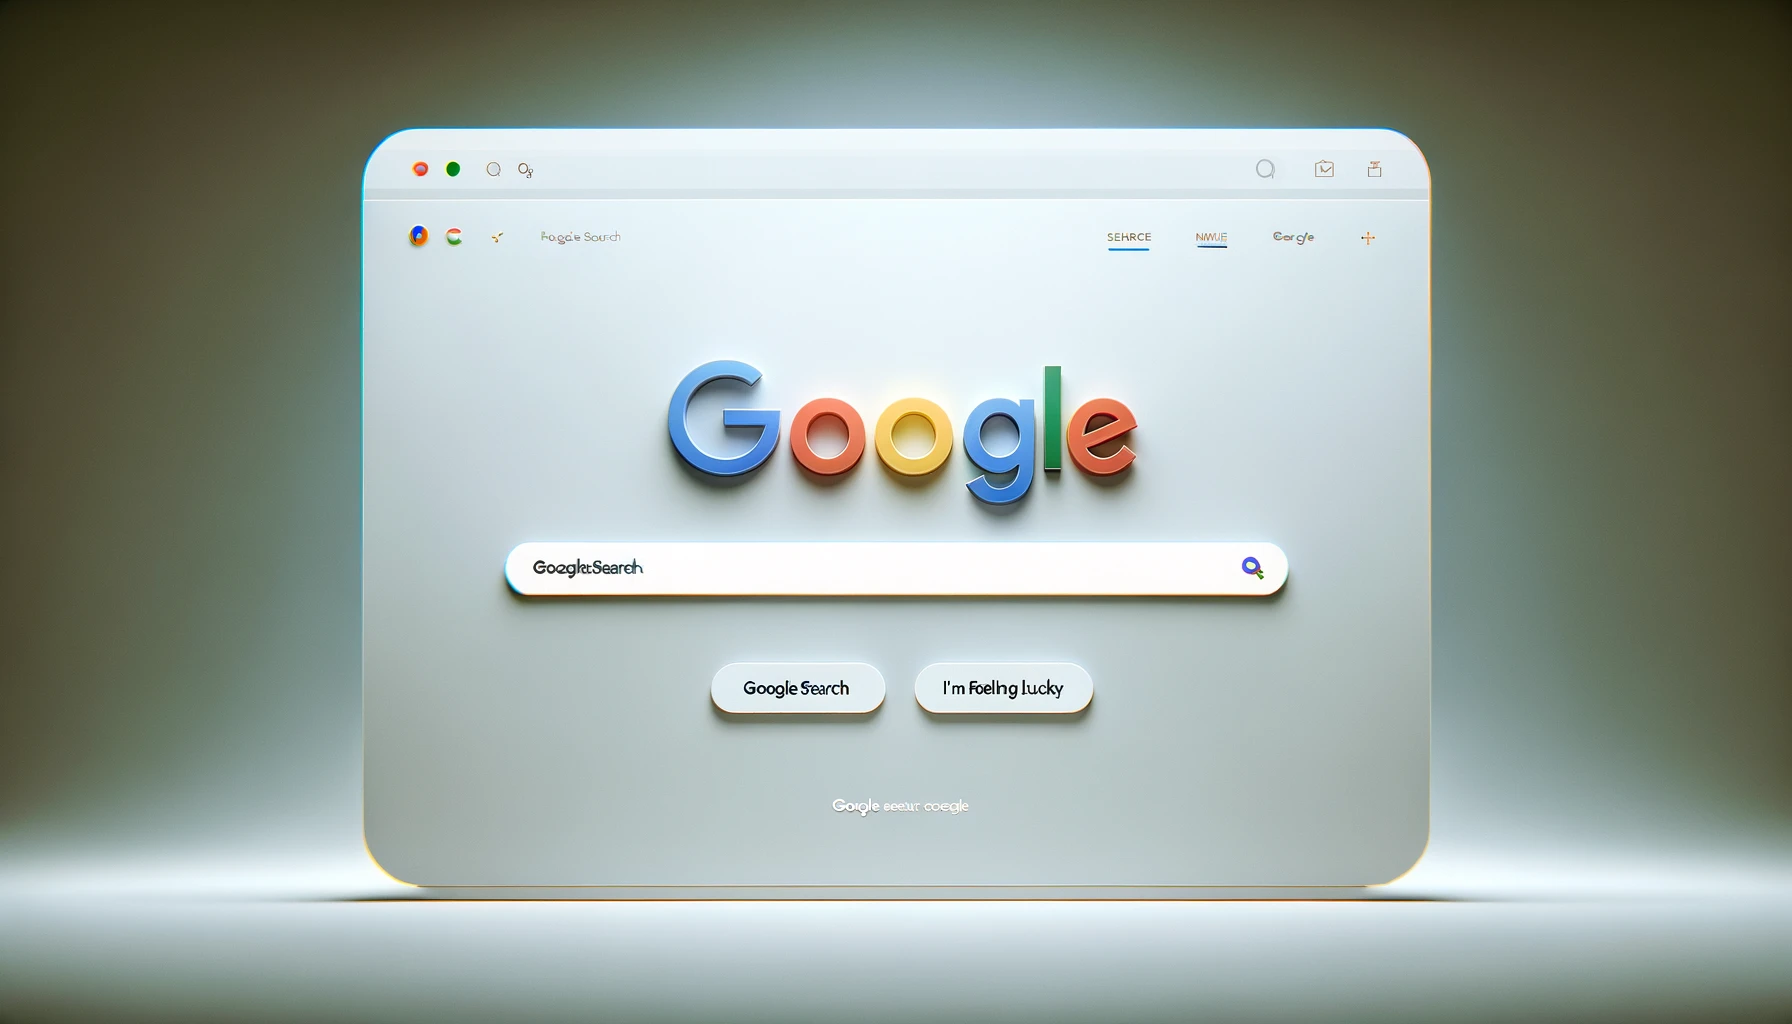 The image above showcases a modern and clean depiction of the Google homepage, highlighting the essential elements that make it instantly recognizable.